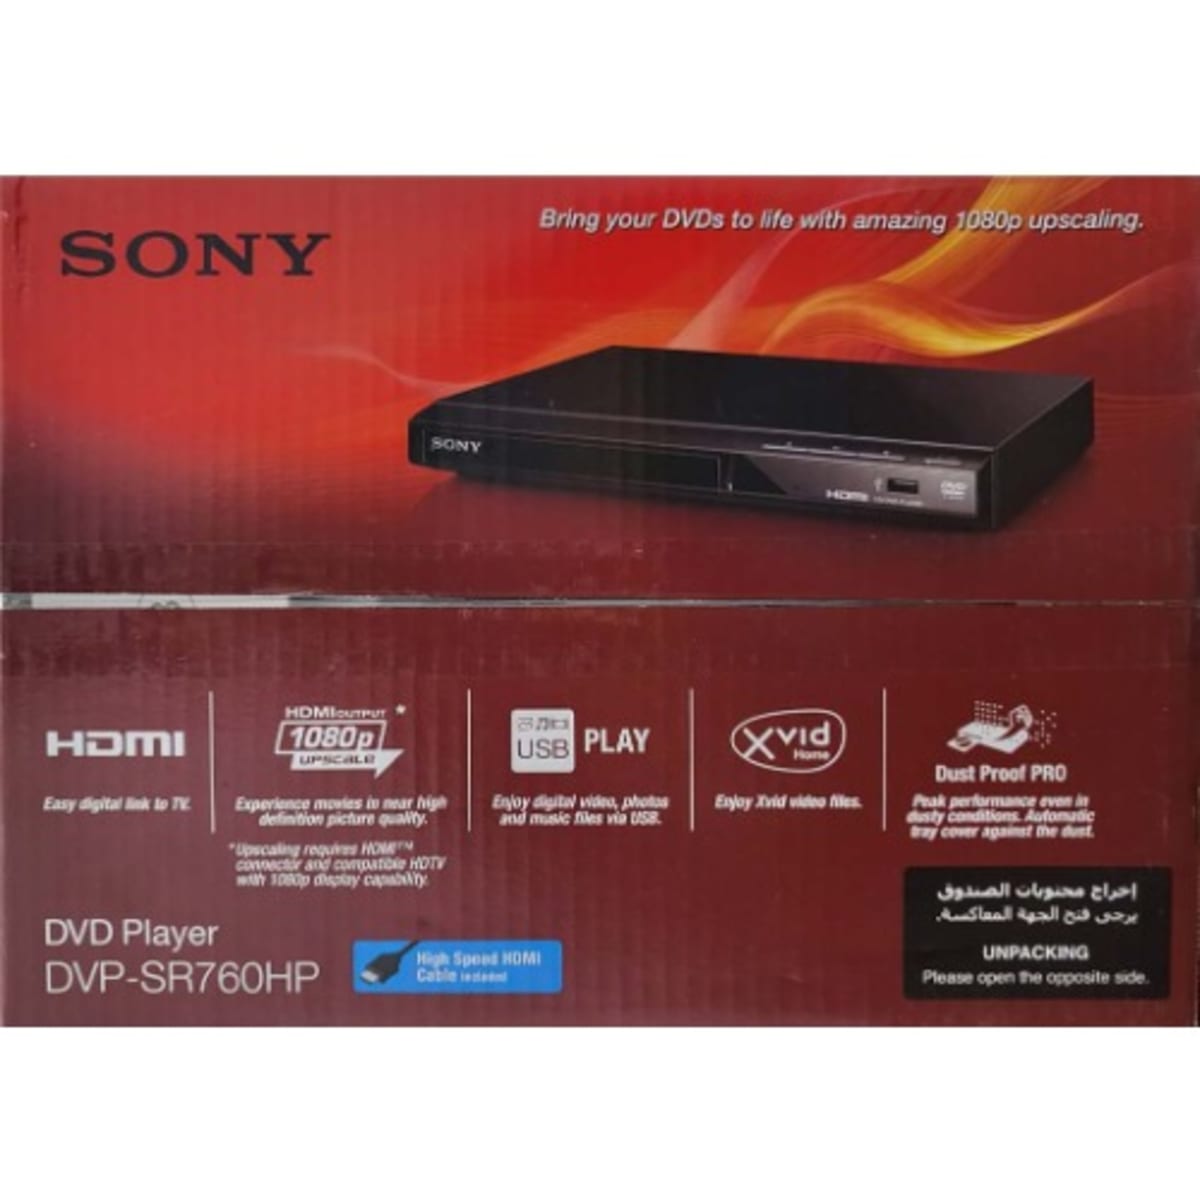 DVD Player with HD Upscaling, DVP-SR760HP